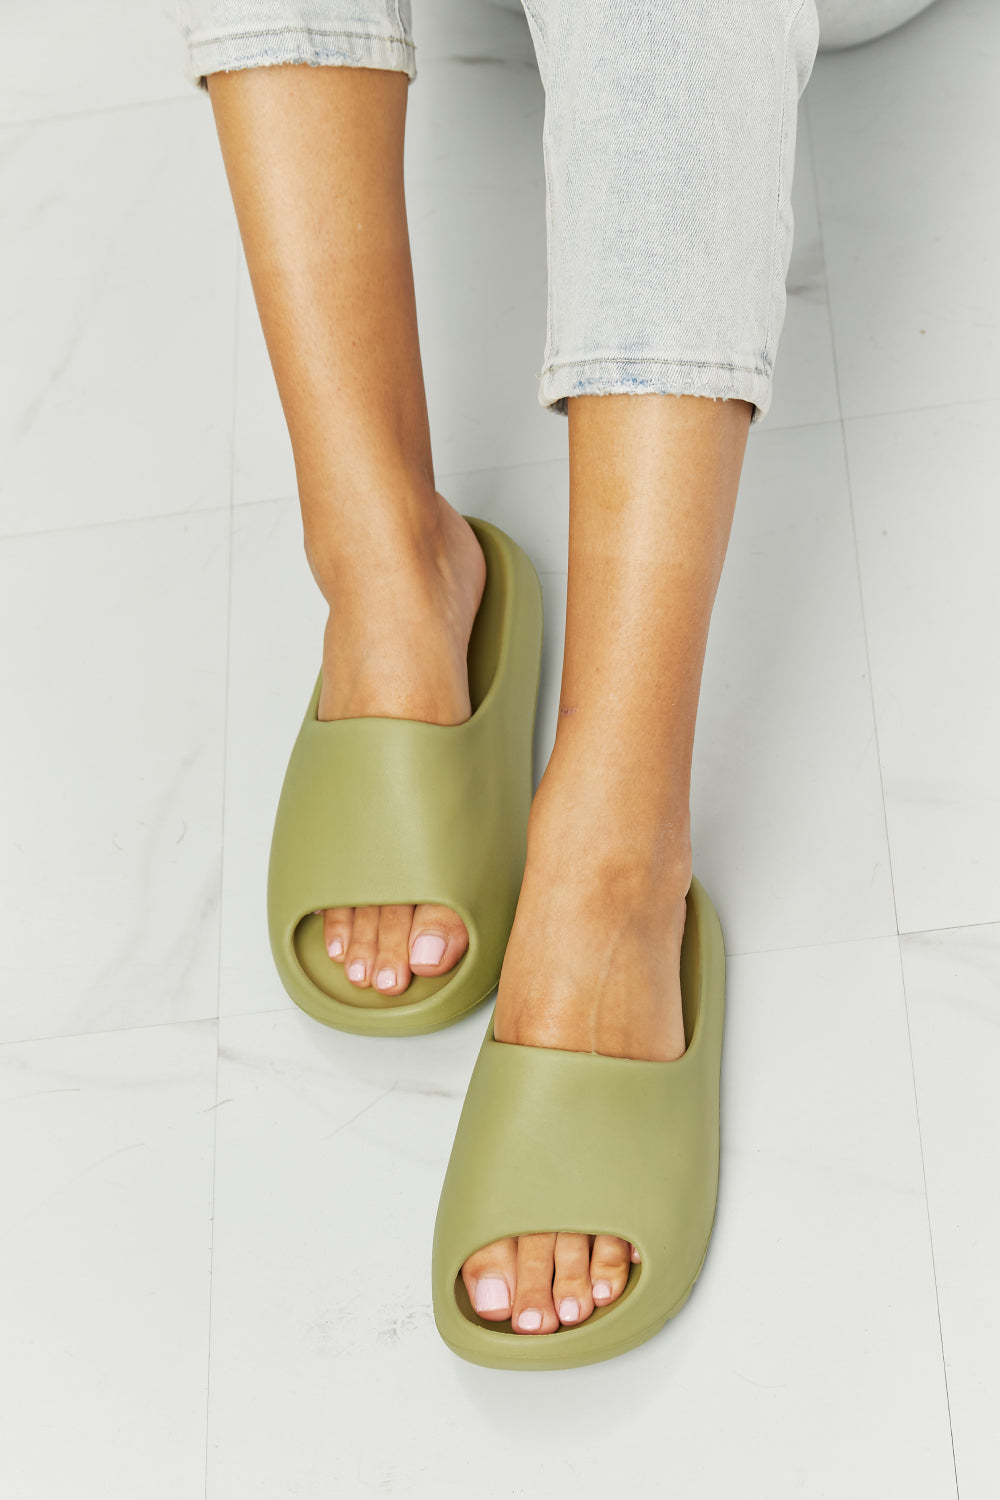 NOOK JOI In My Comfort Zone Slides in Green - Online Only